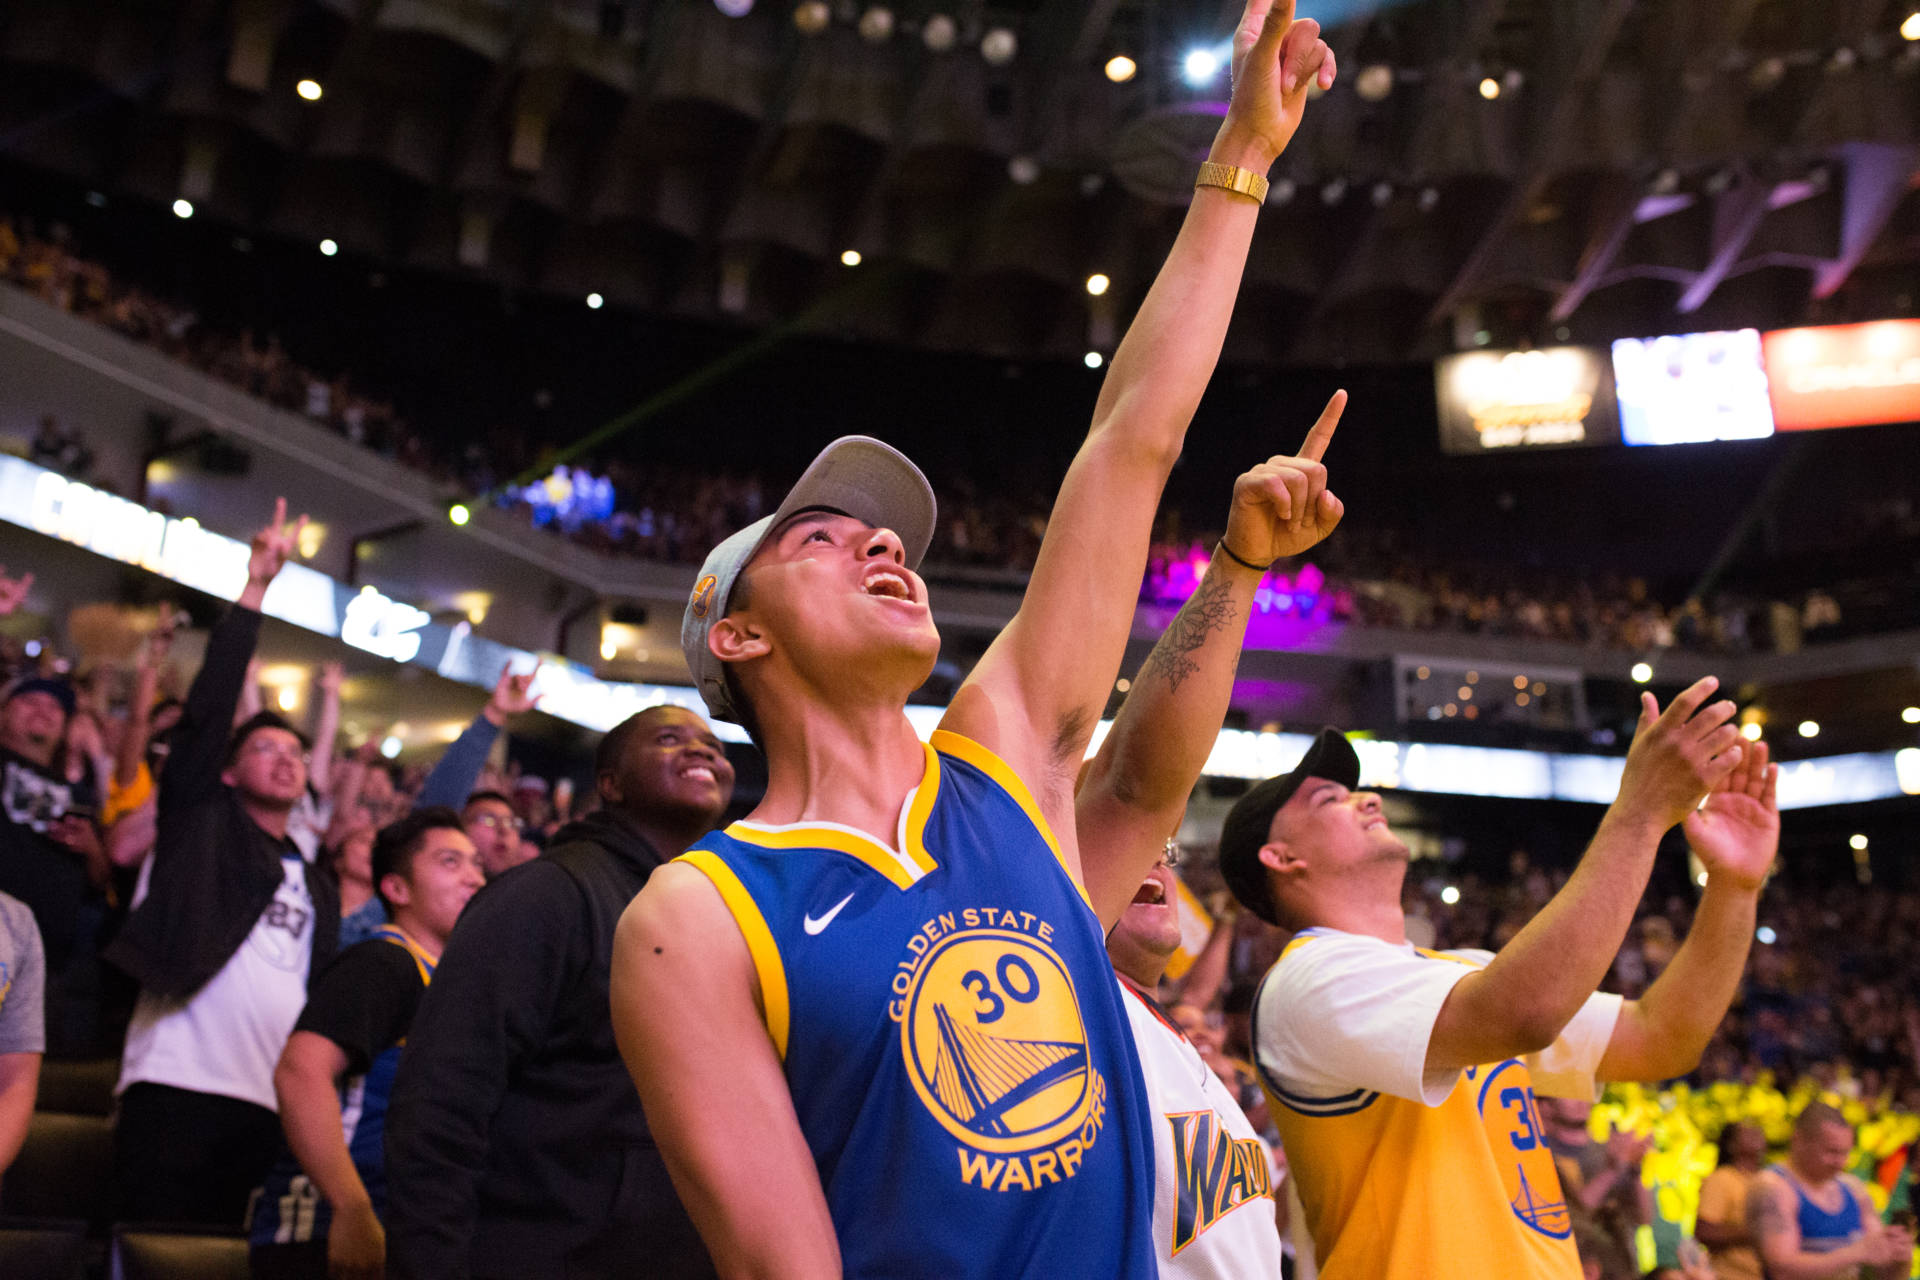 Urias Escudero of San Jose  cheers as the Warriors secure their win over the Cleveland Cavaliers on June 8, 2018 at the Warrior  Watch Party at Oracle Arena in Oakland. Samantha Shanahan/KQED